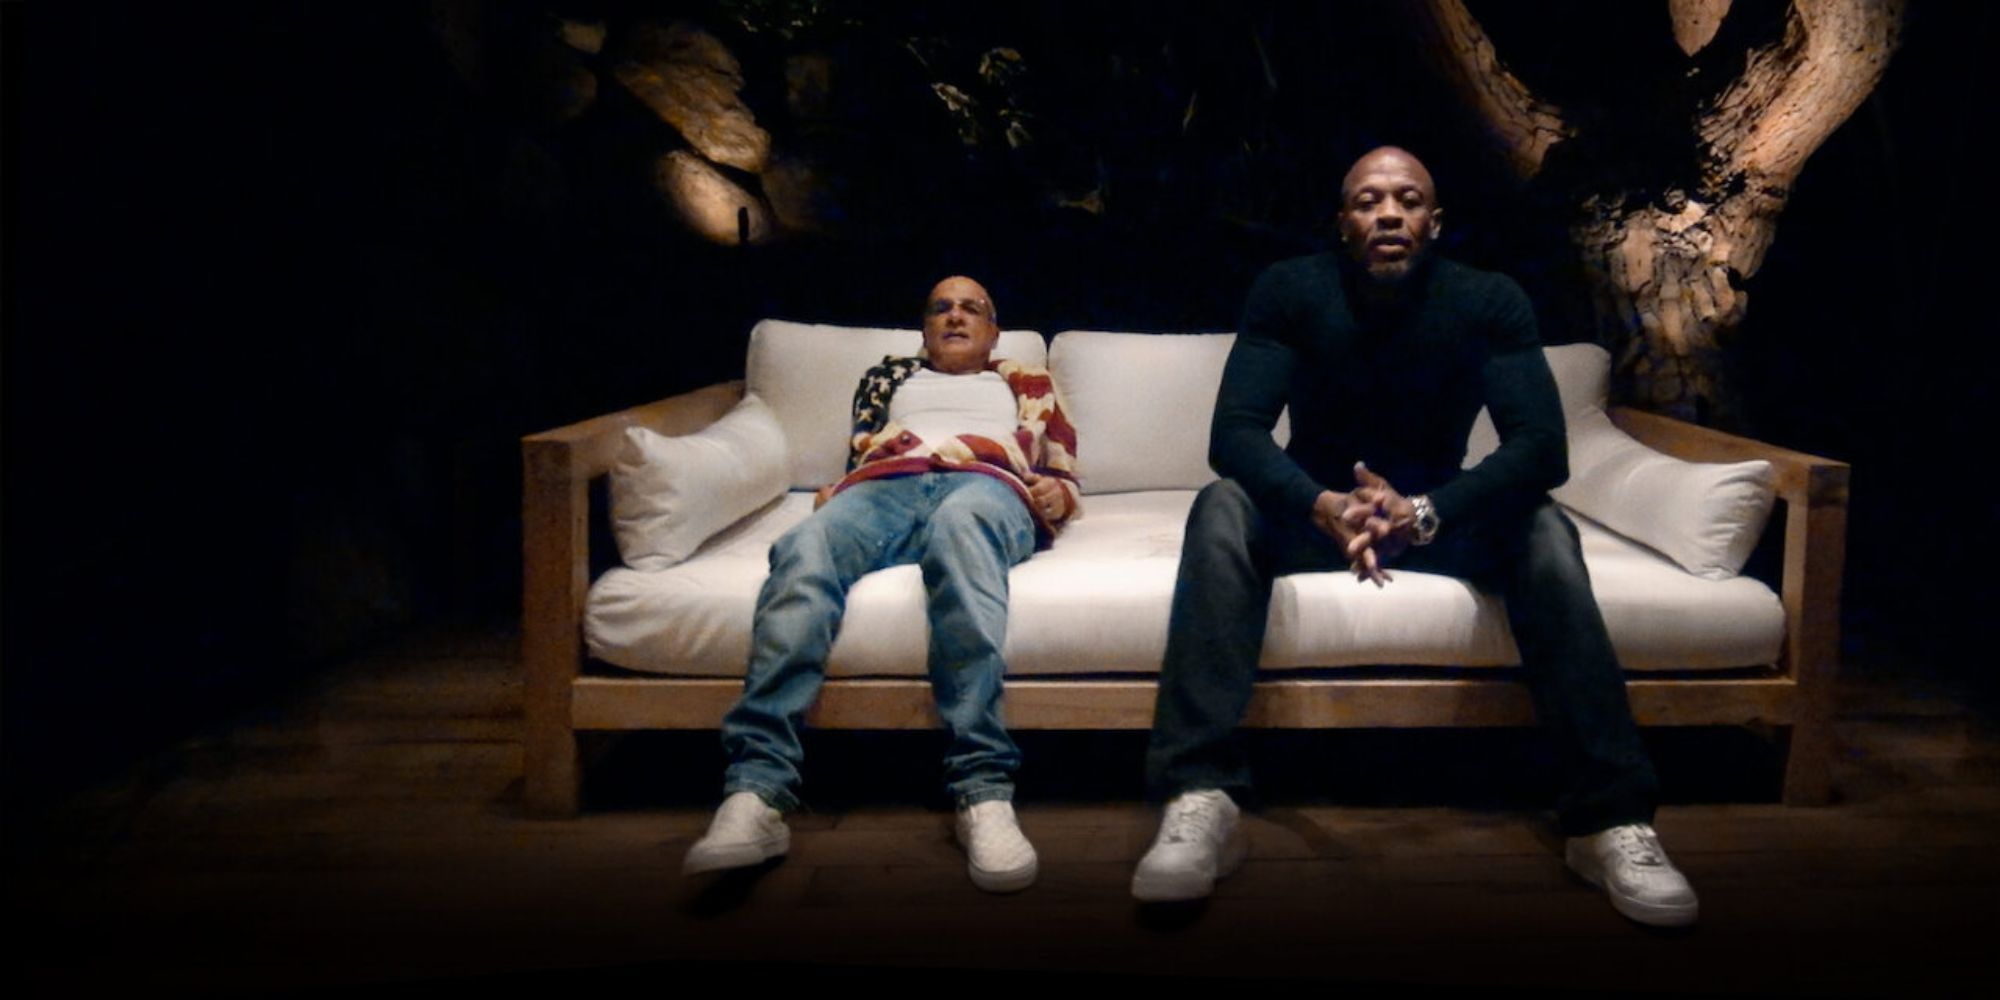 Jimmy Ioving and Dr Dre in 'The Defiant Ones'